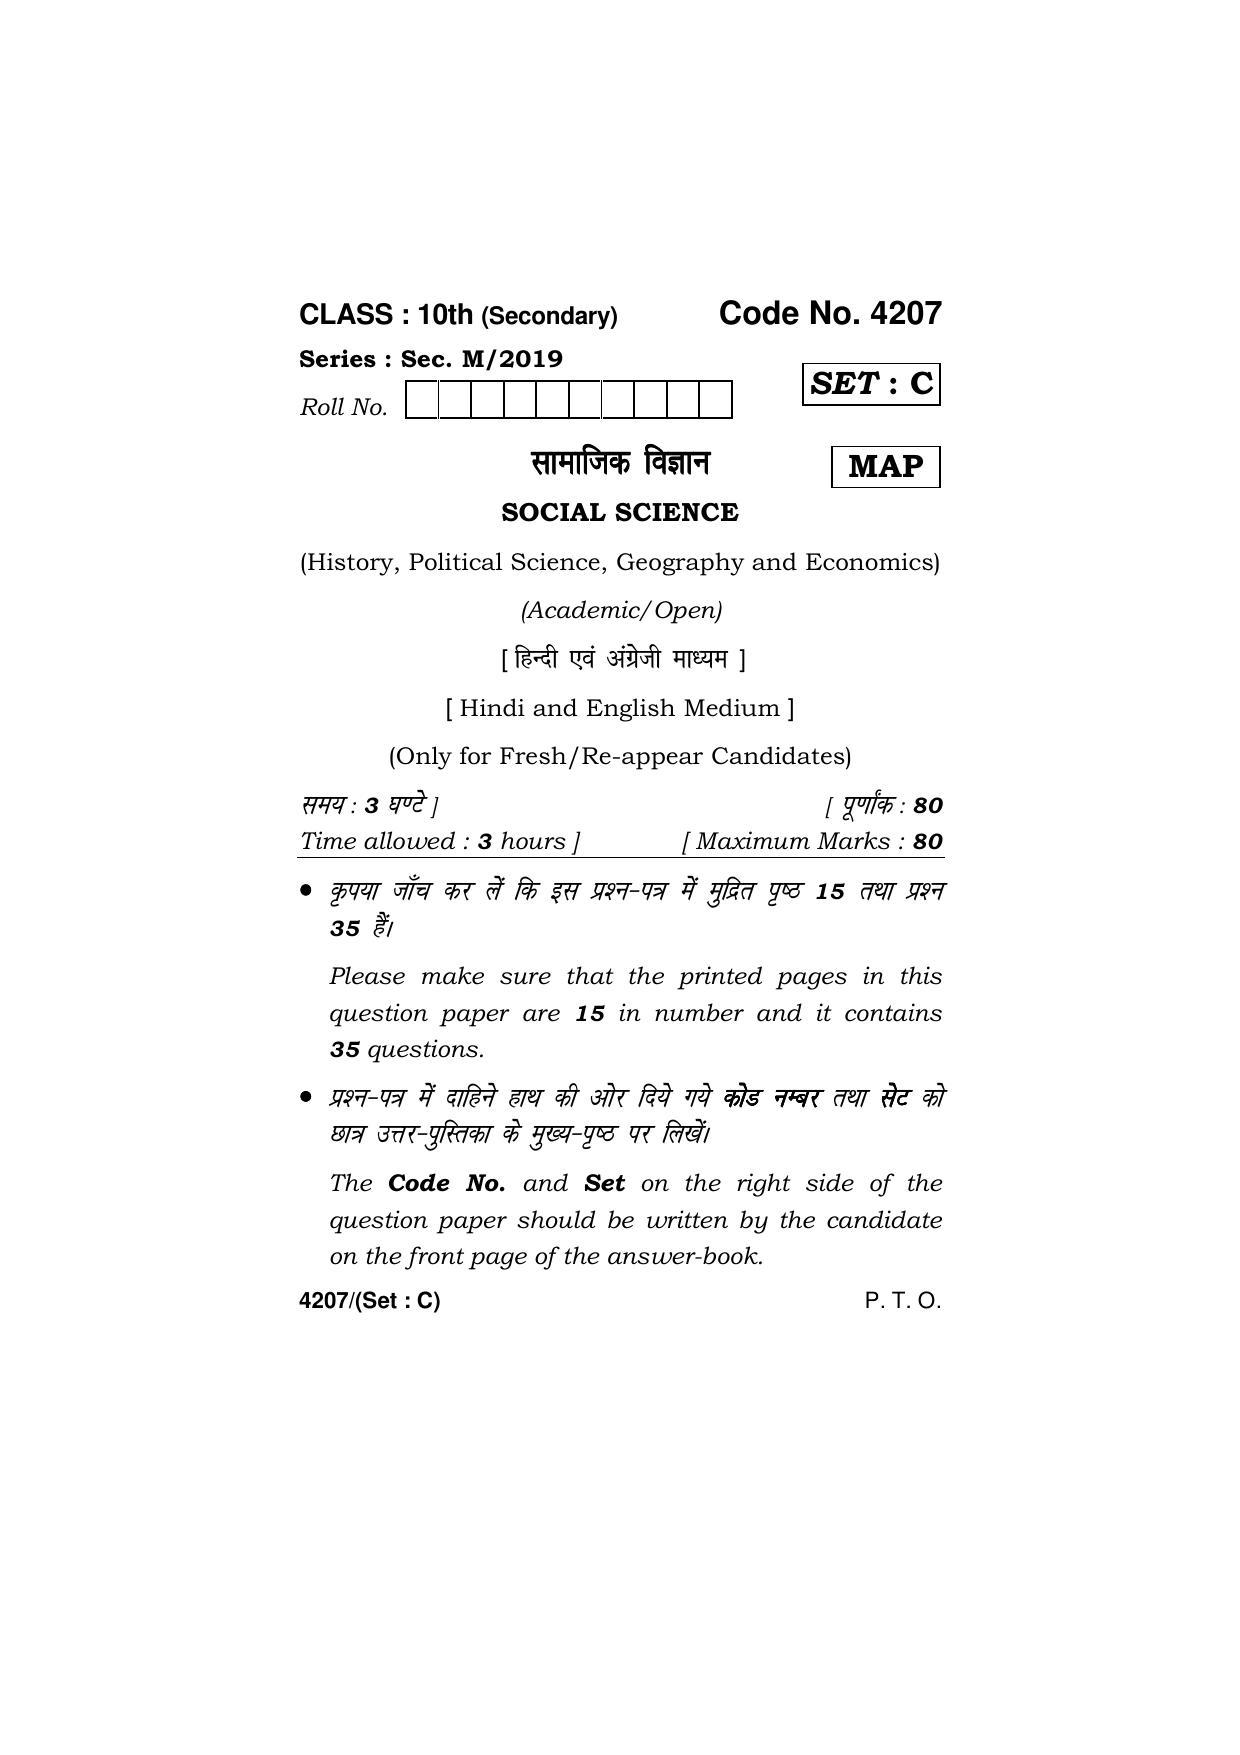 Haryana Board HBSE Class 10 Social Science (All Set) 2019 Question Paper - Page 31